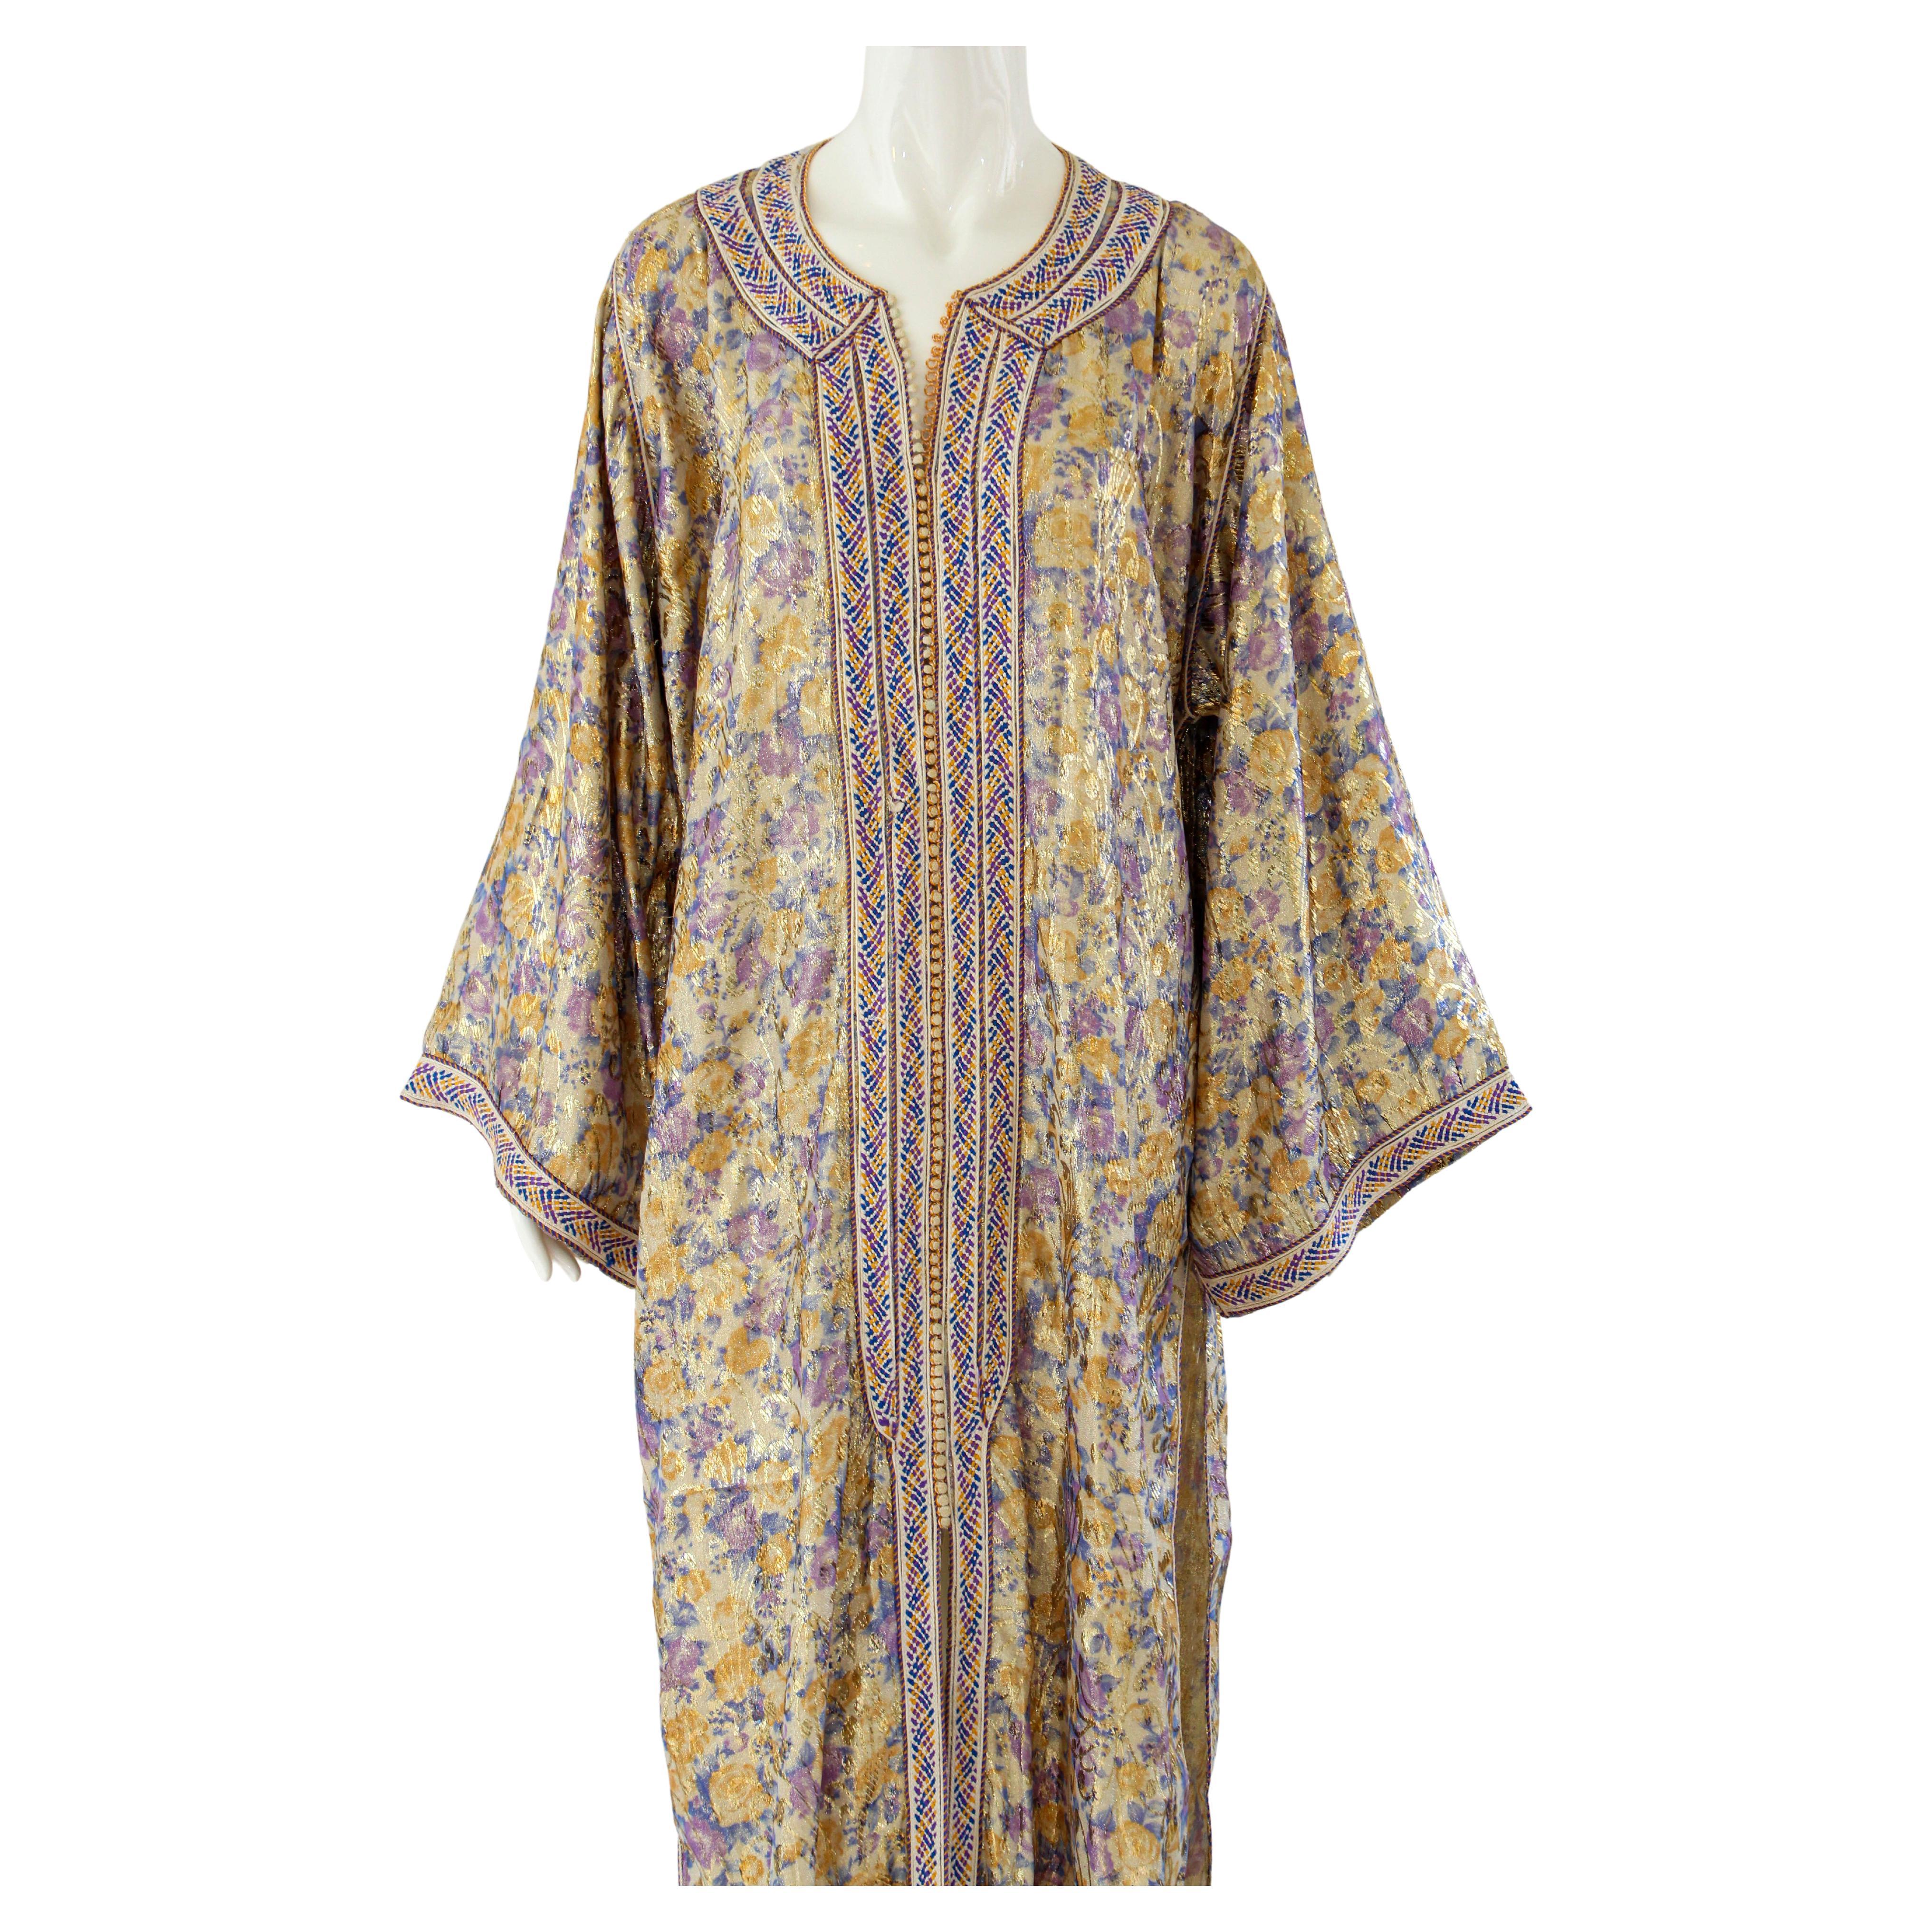 Elegant Moroccan caftan metallic silk floral brocade, purple and gold.
circa 1970s.
This light summery caftan is crafted in Morocco and tailored for a relaxed fit, features a traditional neckline, embellished sleeves and vented sides.
This long maxi